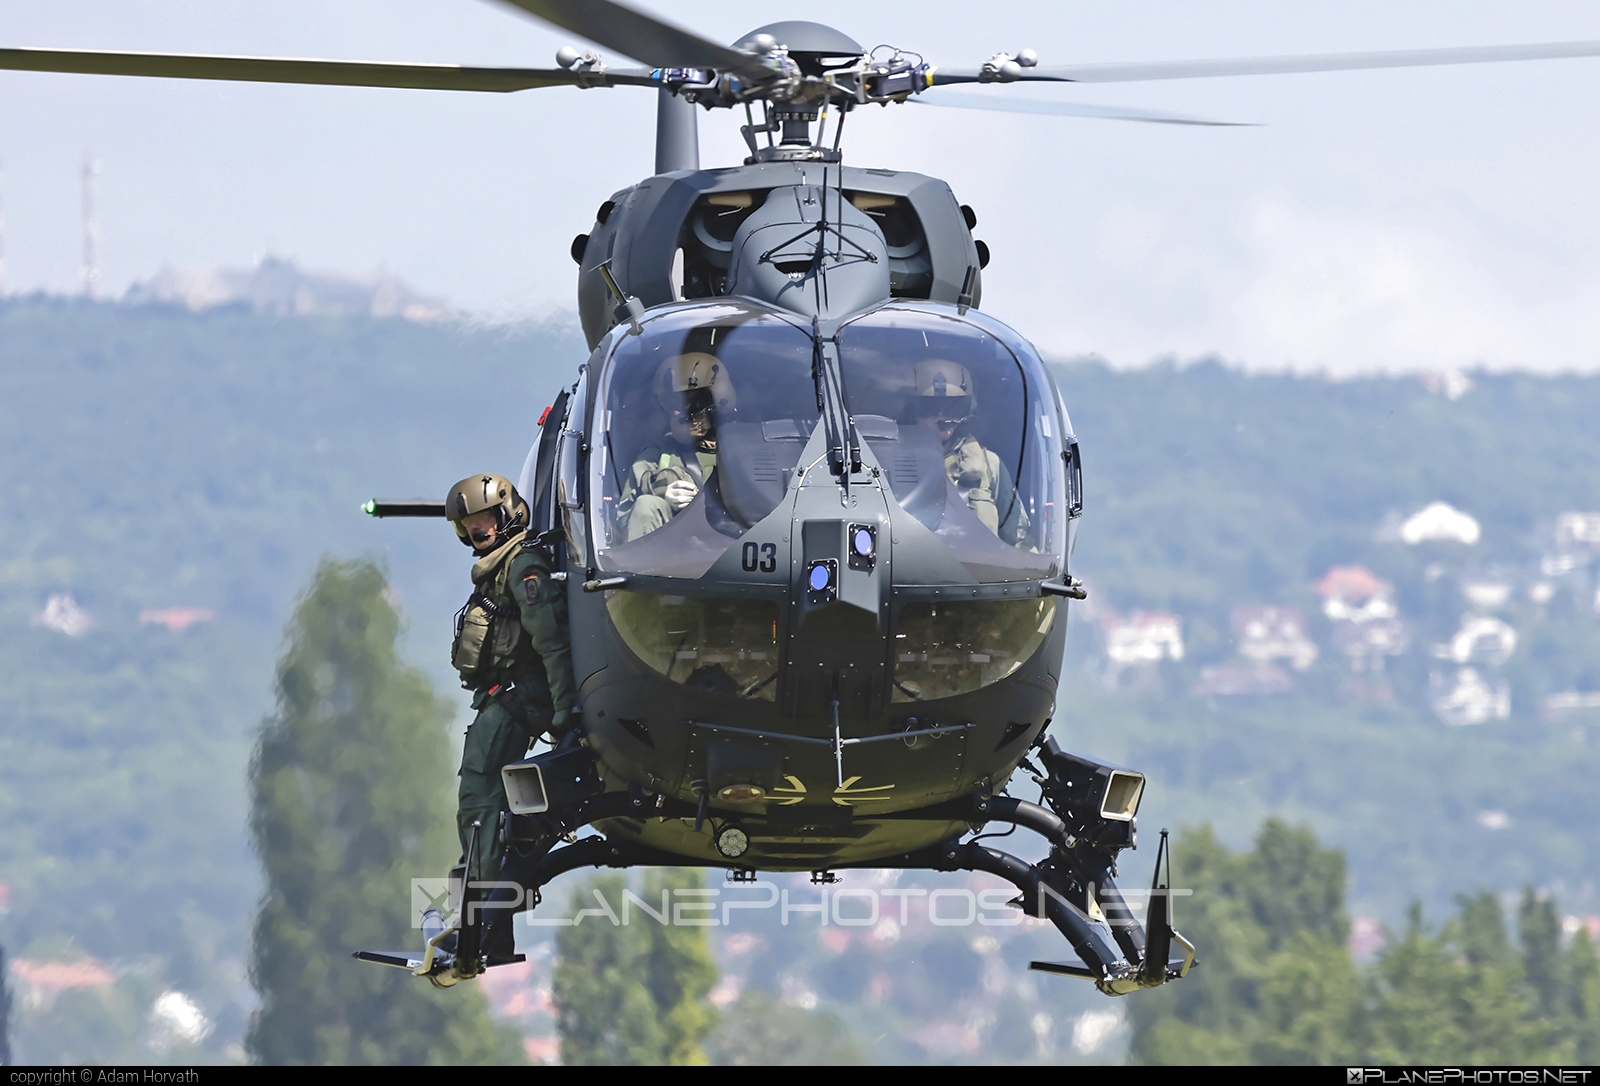 Airbus Helicopters H145M - 76+03 operated by Luftwaffe (German Air Force) #GermanAirForce #airbusH145 #airbusH145m #airbusHelicoptersH145 #airbusHelicoptersH145m #airbushelicopters #h145 #h145m #luftwaffe